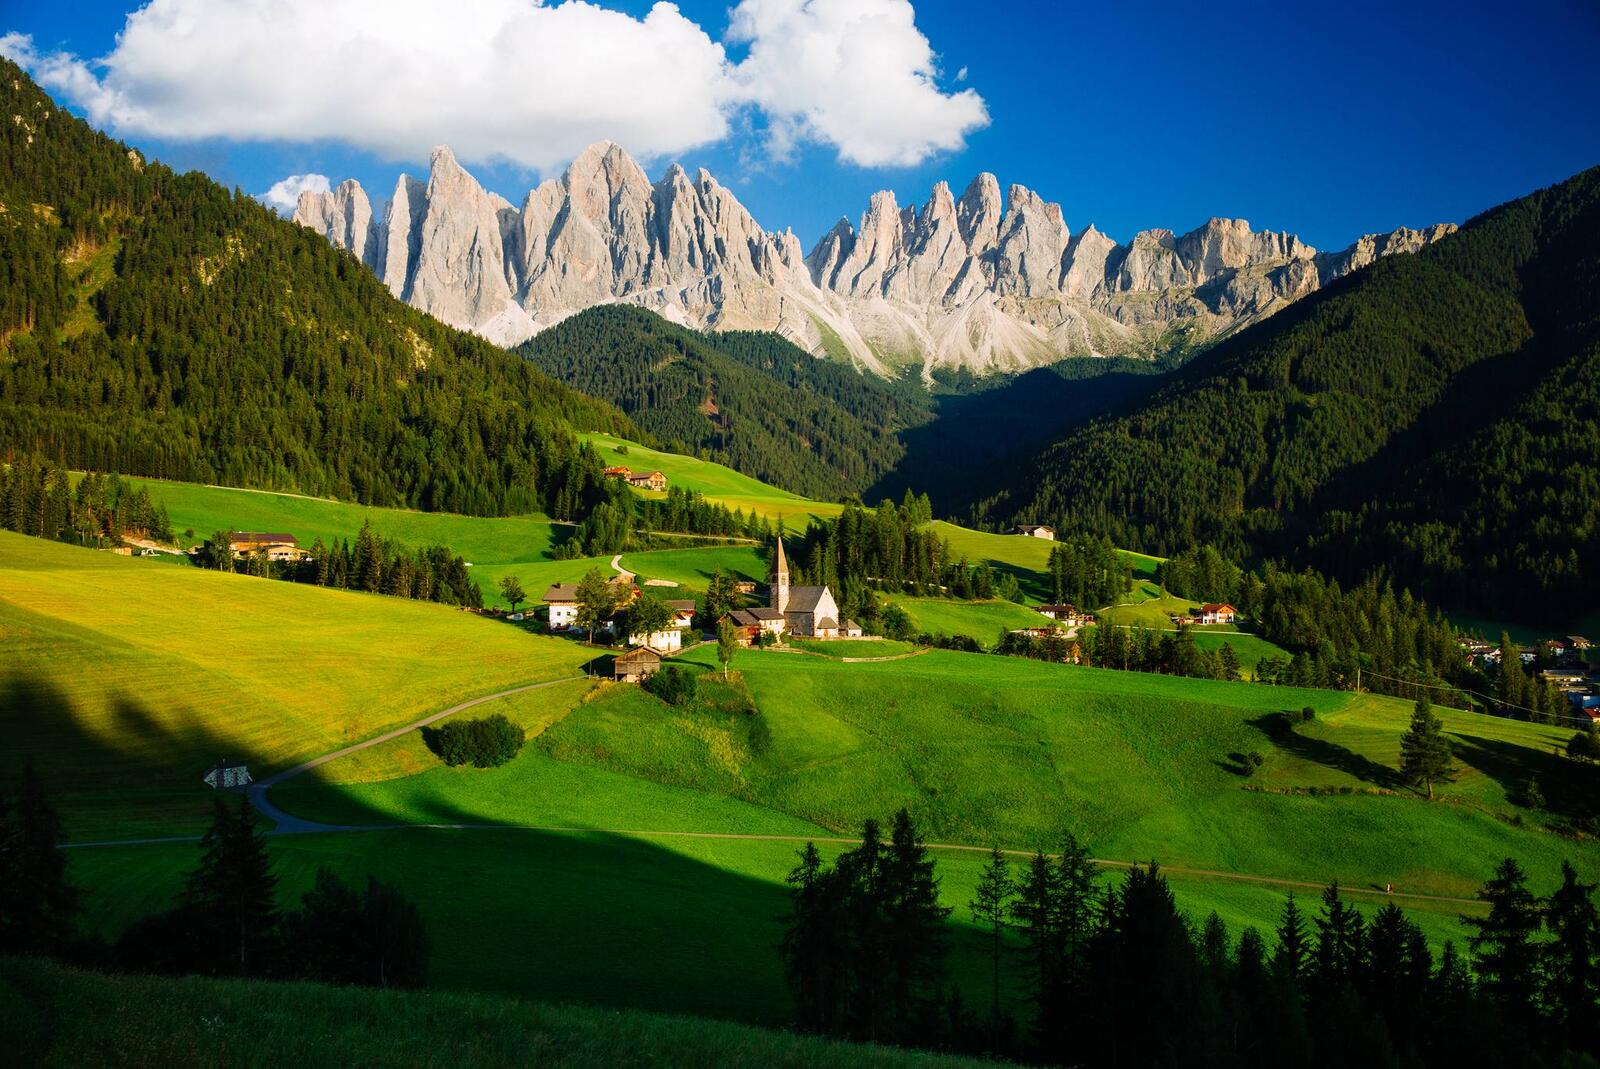 Wallpapers Dolomites Alps Italy on the desktop